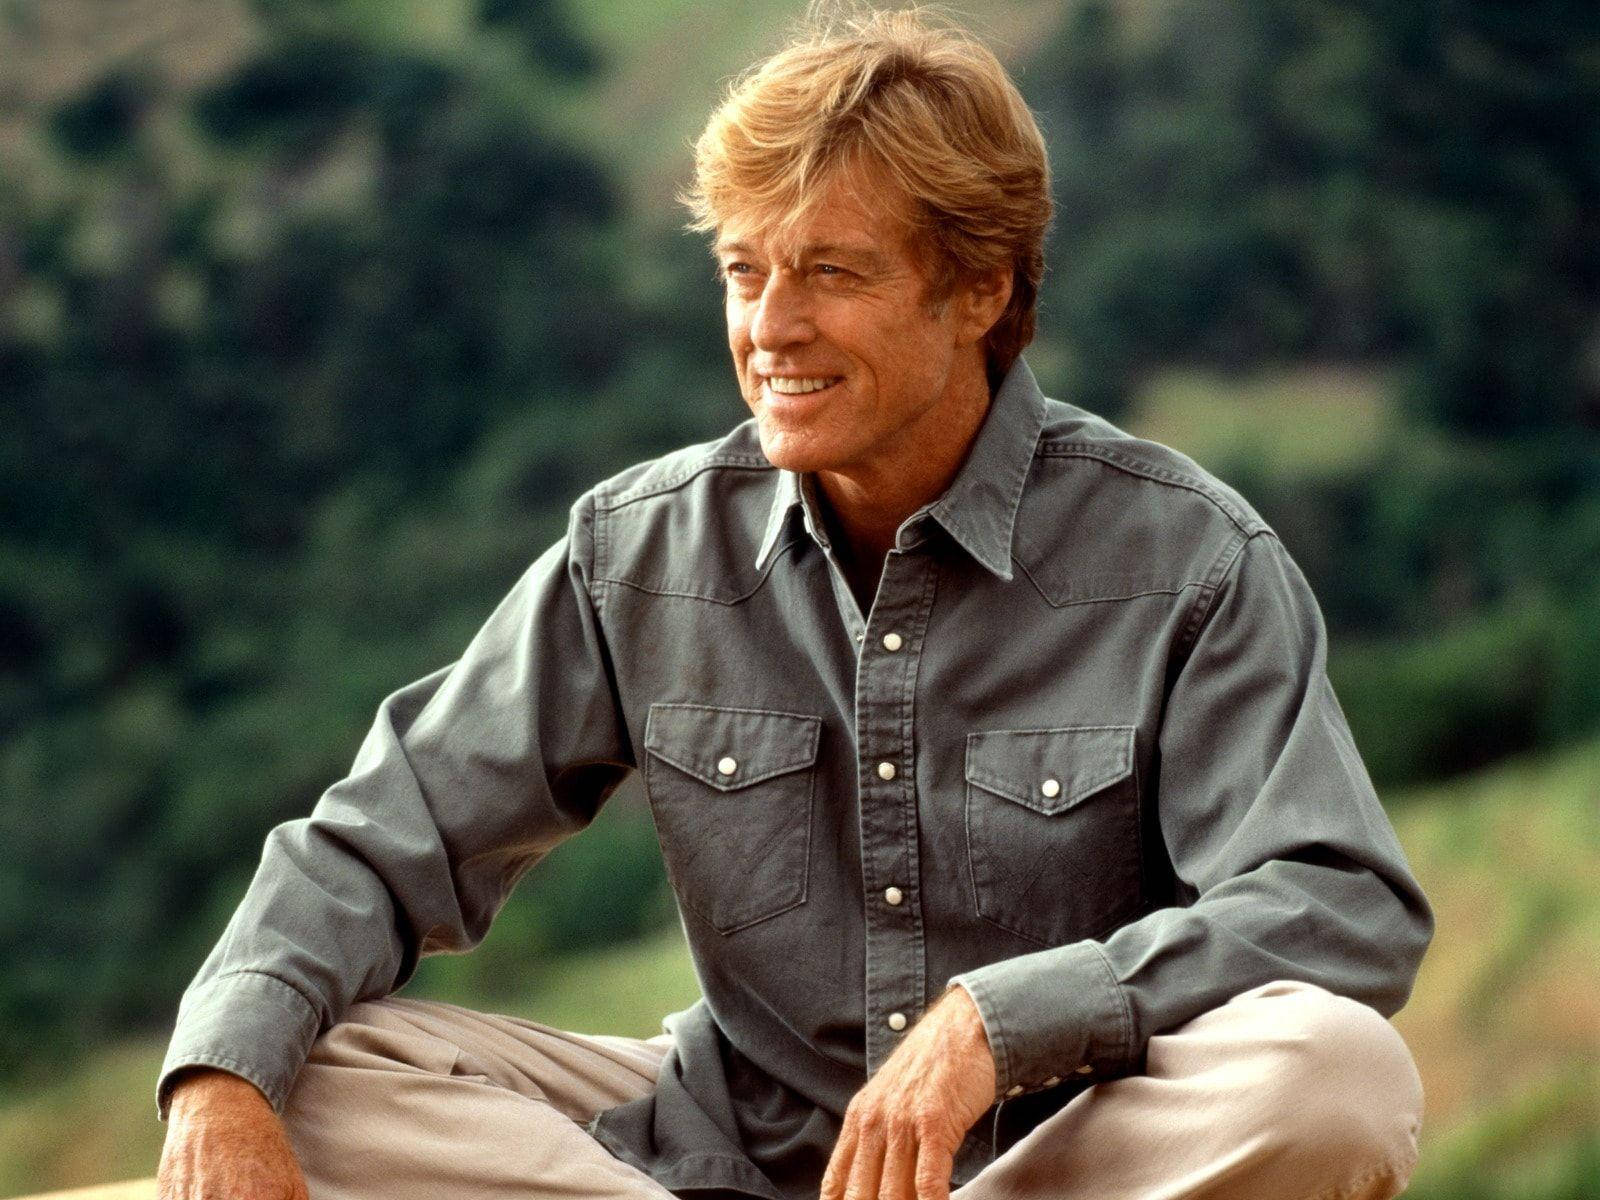 Robert Redford Smiling And Sitting